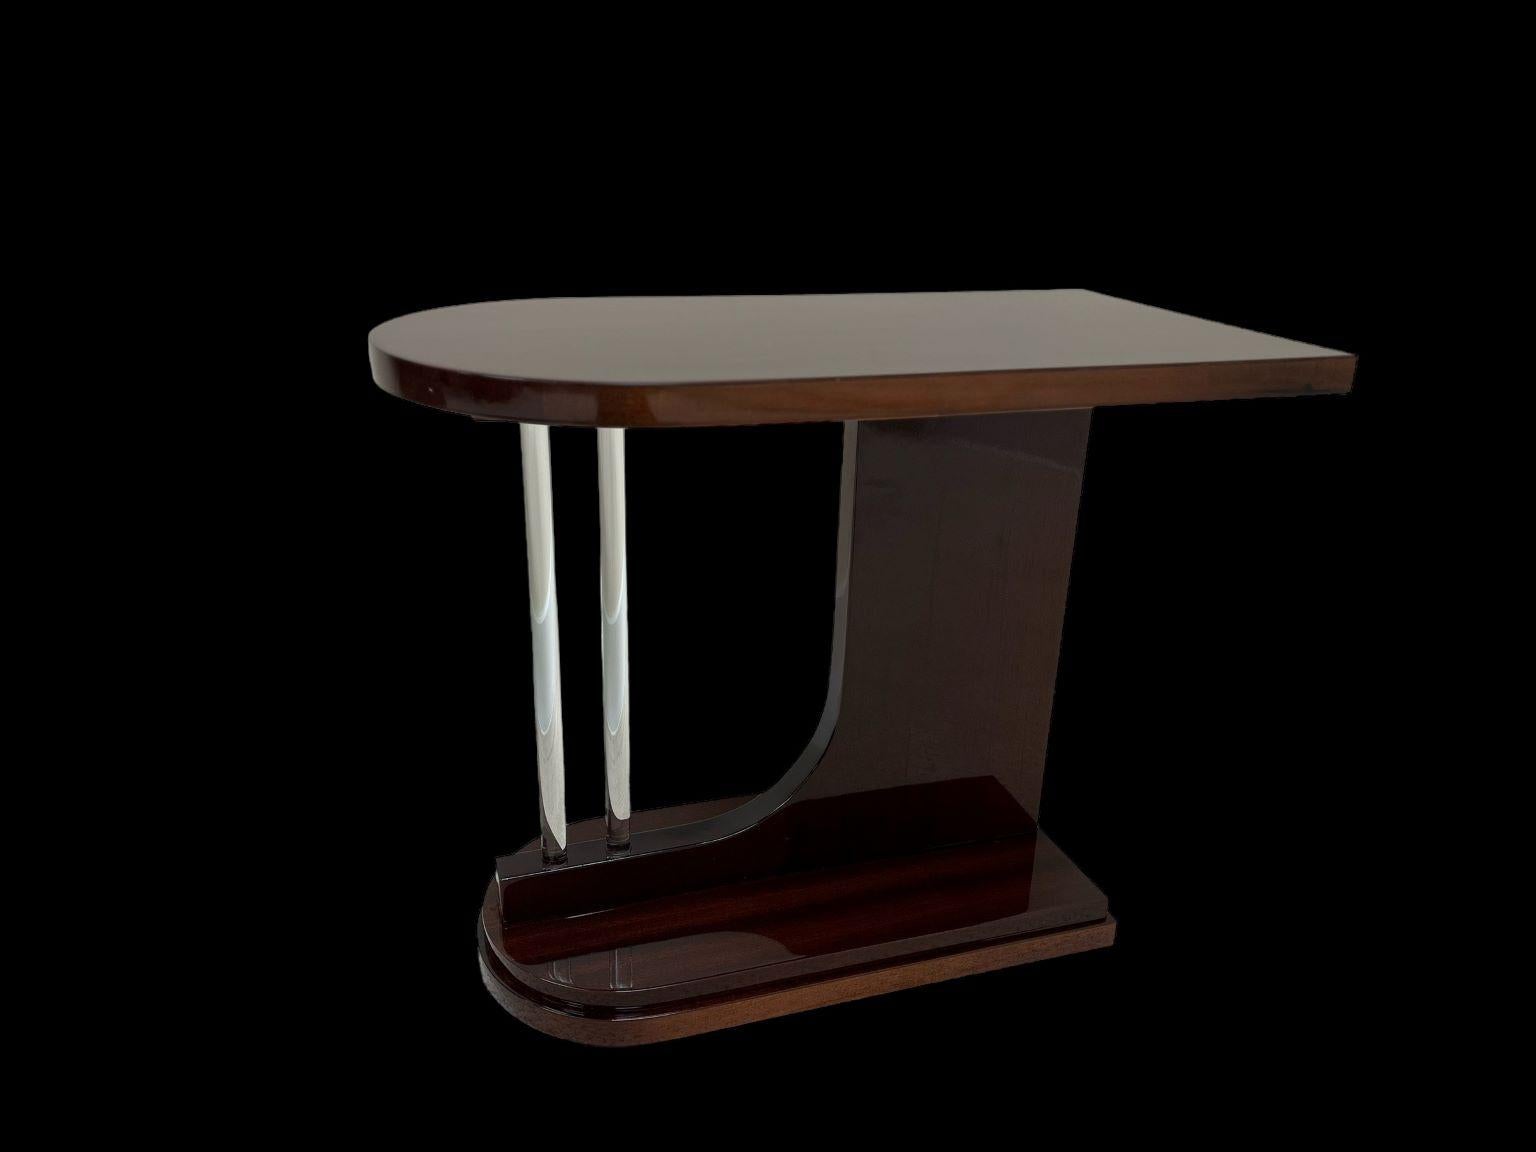 Streamline Moderne Art Deco Mahogany Side Table. The table has a unique bullet shape design with two solid glass decorative elements. The mahogany is beautifully restored in a gloss finish. A great example of American Machine Age, Streamline Moderne